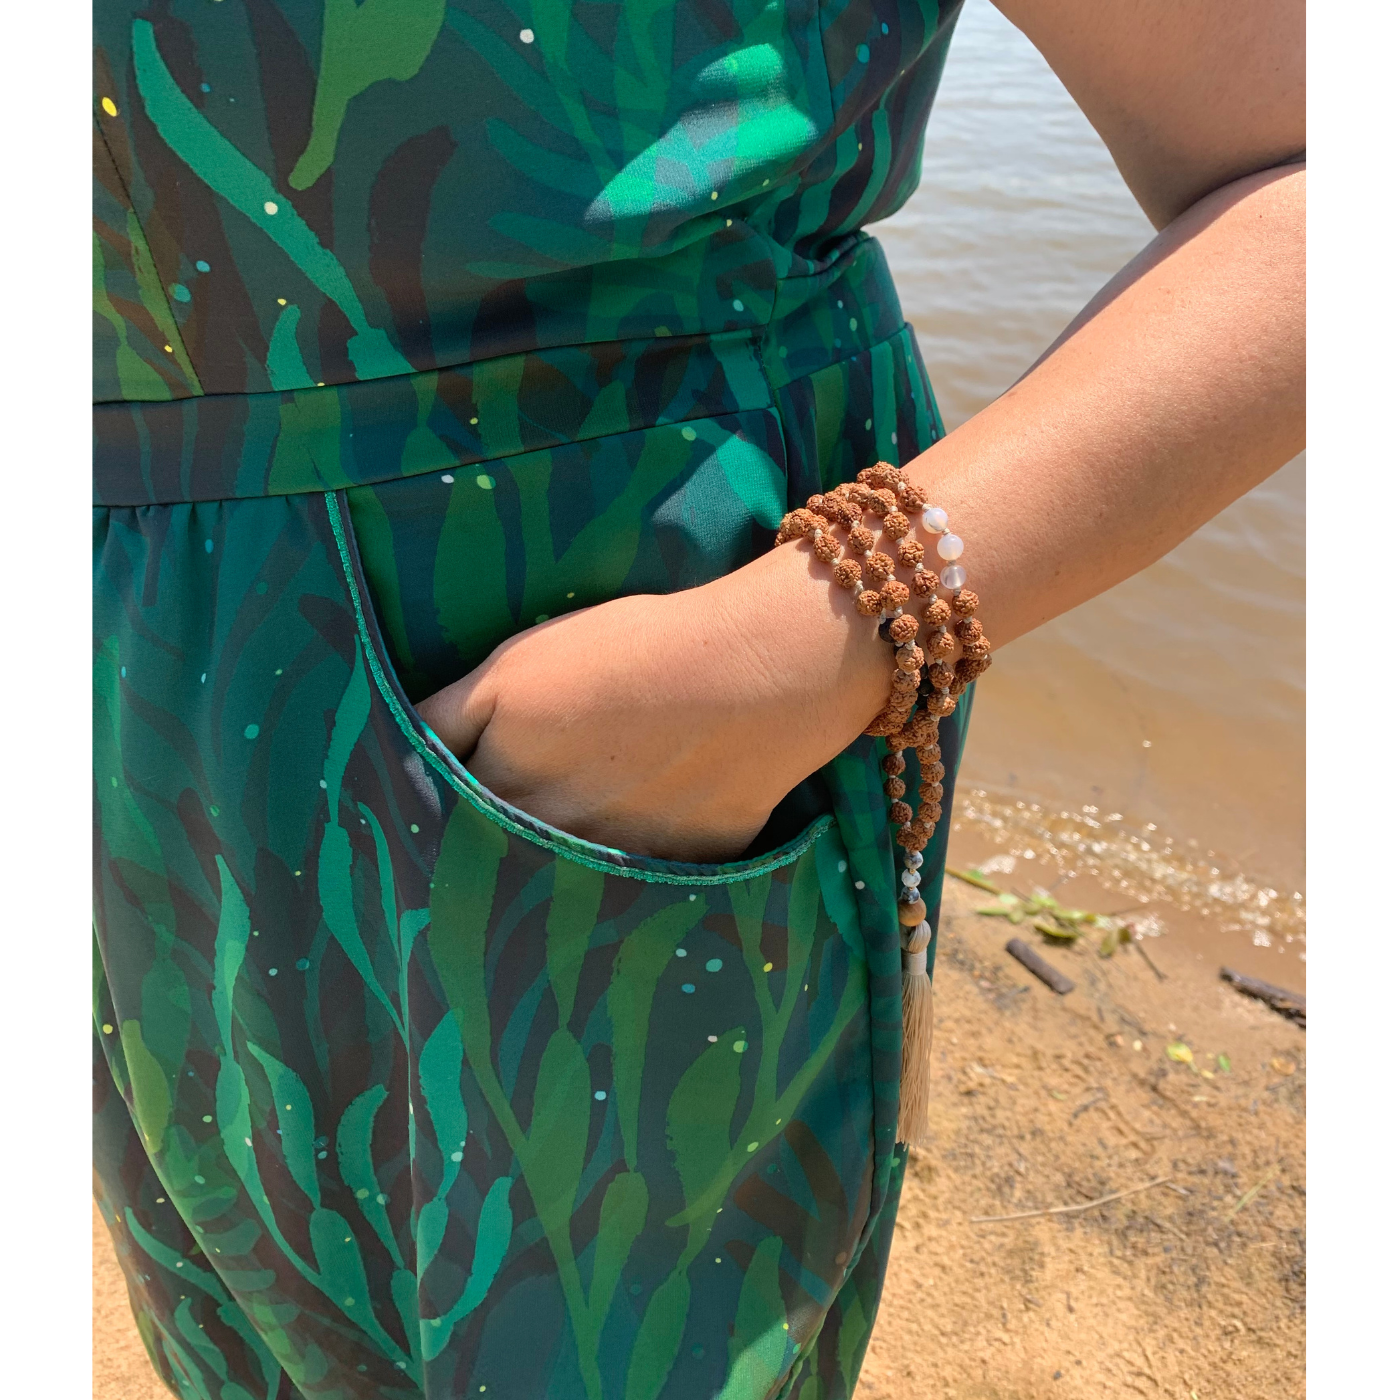 A close up of the midsection of a green dress Nisha is wearing featuring a design with black and green seaweed flowing in all directions. Her left hand is in her pocket and a bracelet with small brown round beads is on her wrist.